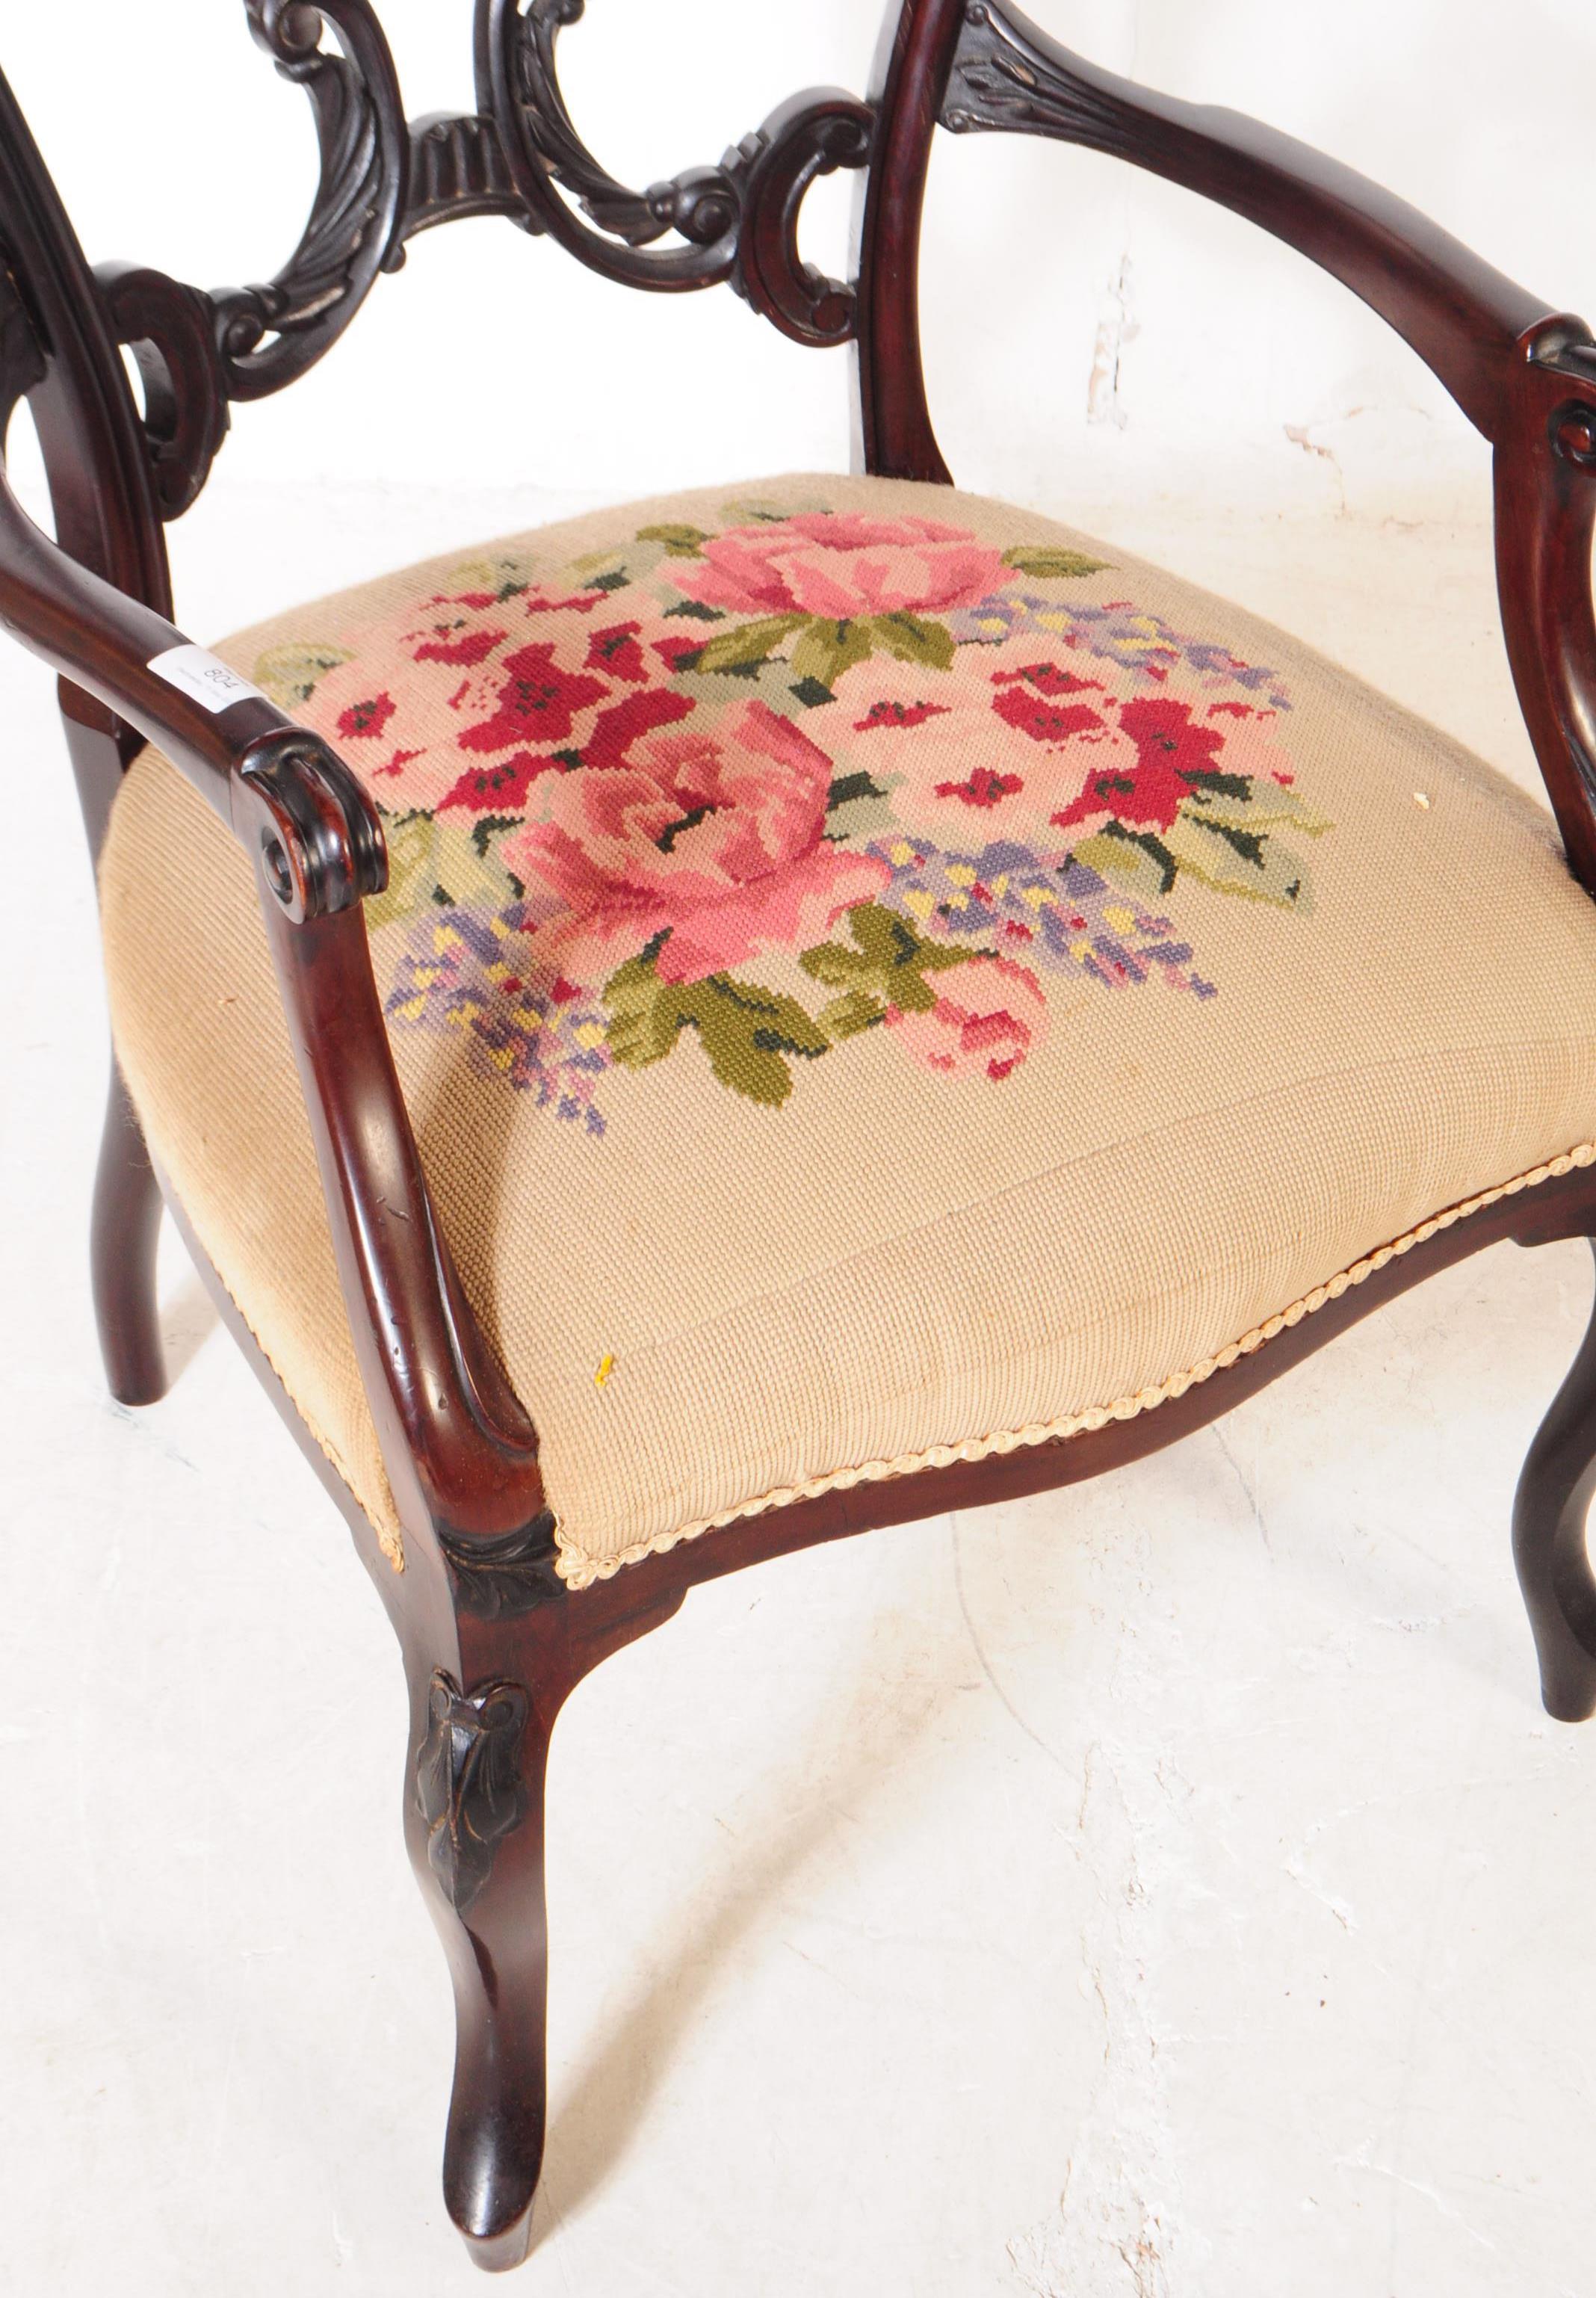 EDWARDIAN CHIPPENDALE REVIVAL BEDROOM ARMCHAIR - Image 3 of 5